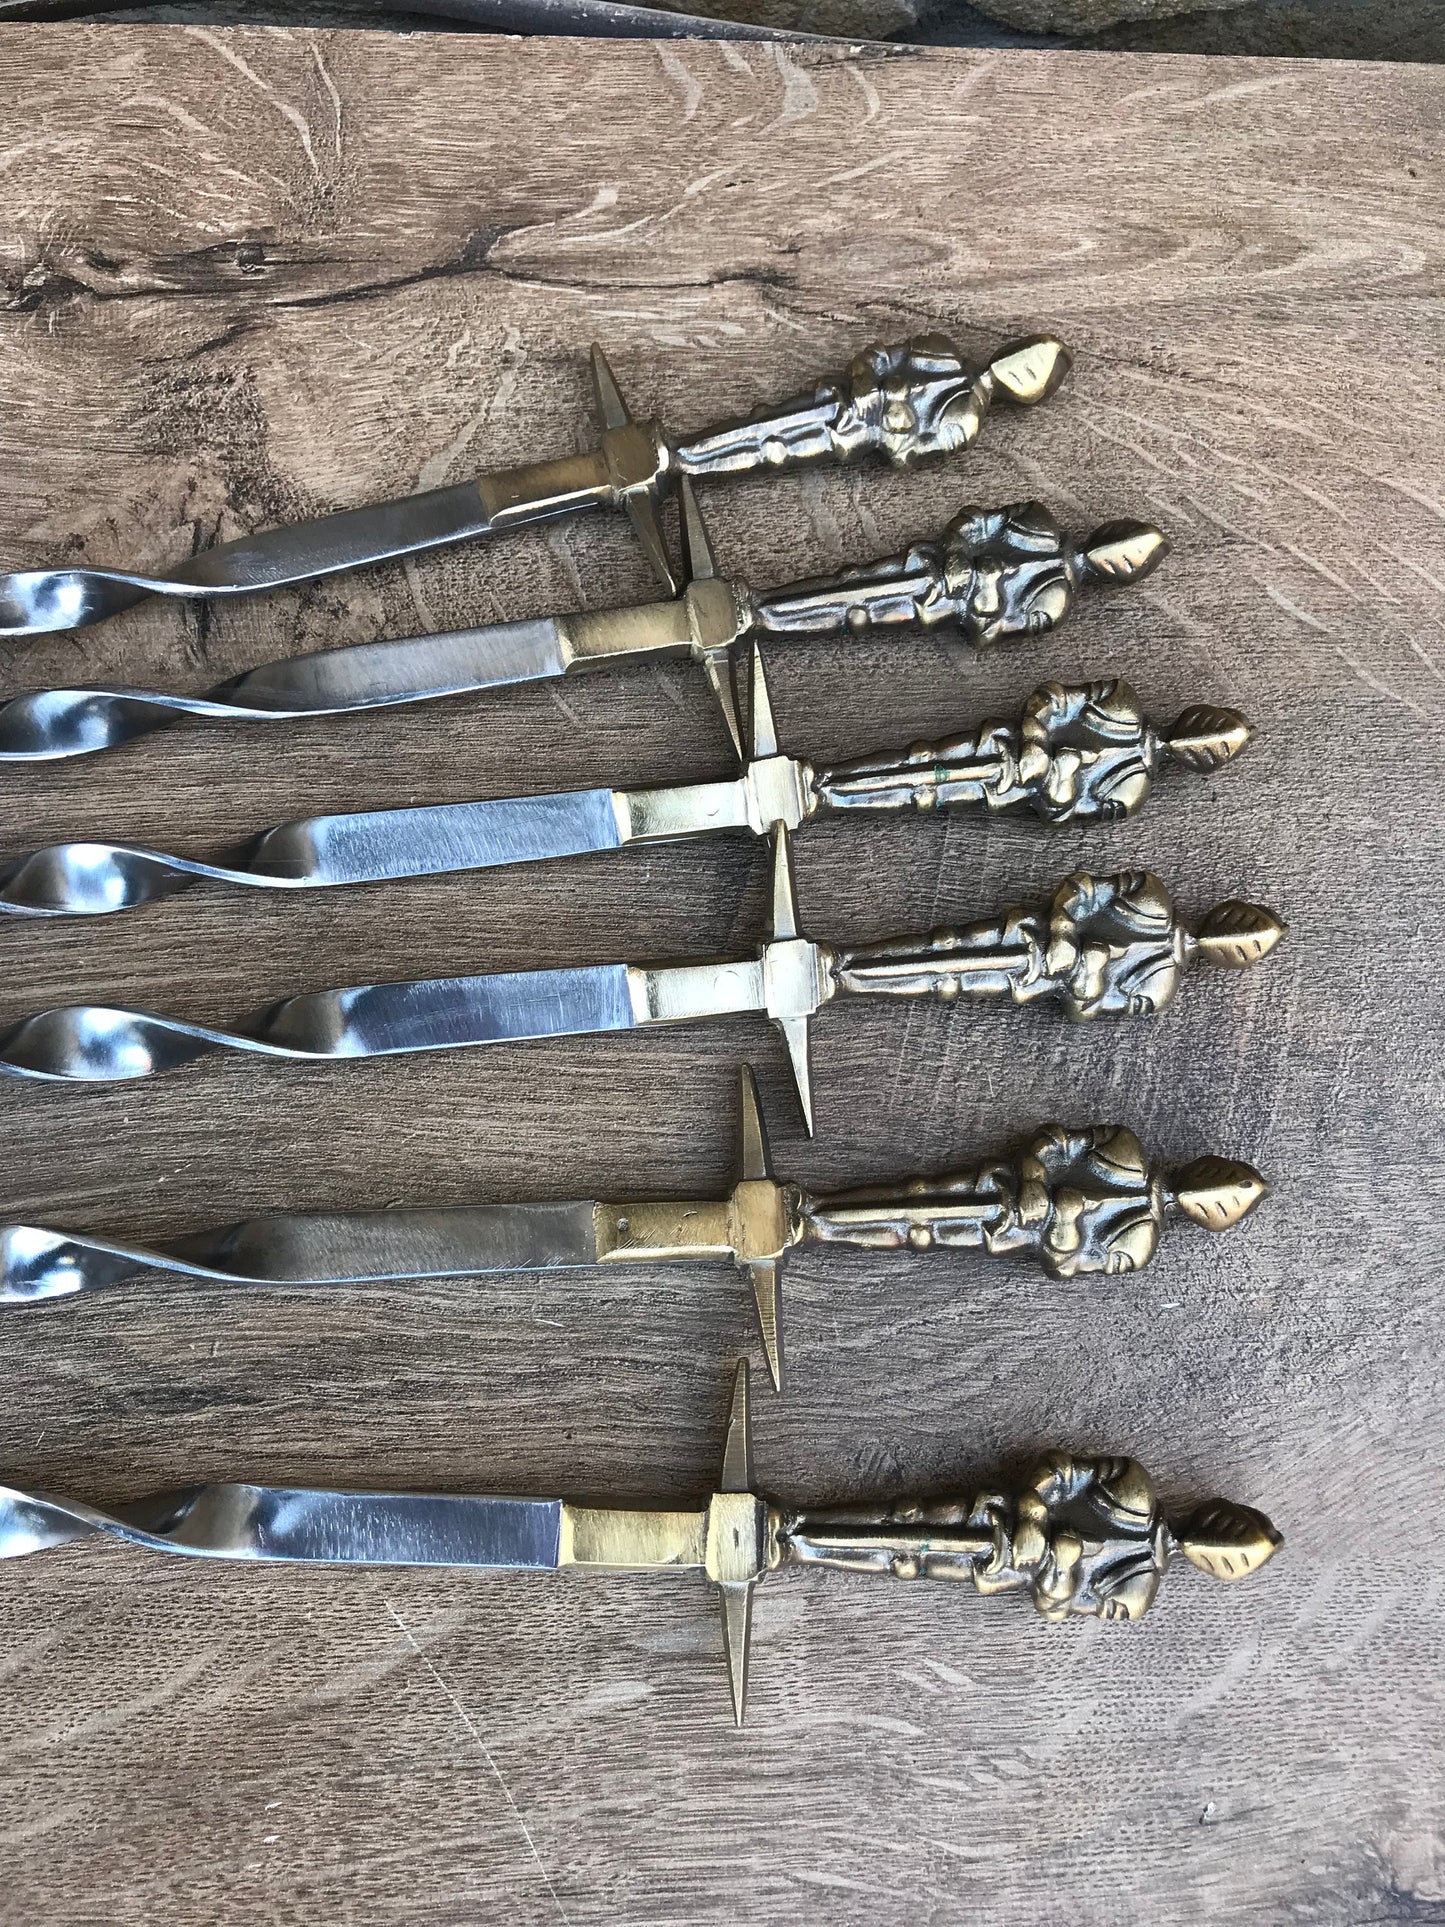 Viking food, skewers, viking skewers, grill tools, pricker, Middle Ages, camp equipment, LARP. SCA, reenactment,medieval,picnic,gift for dad